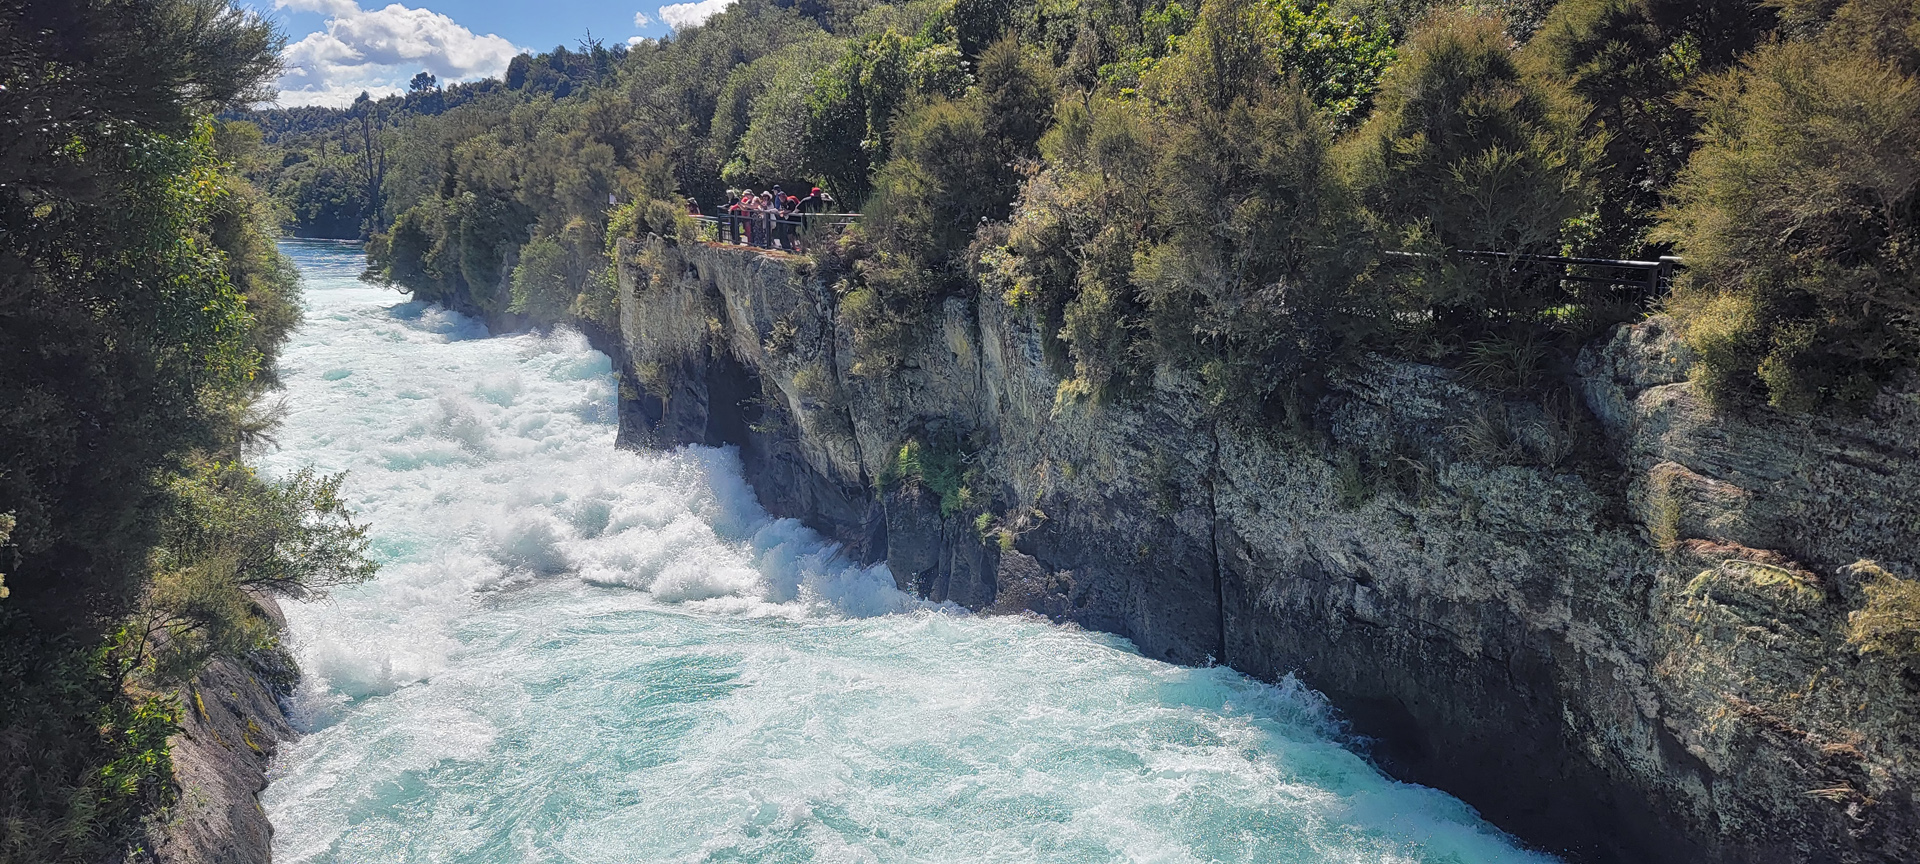 Huka Falls location filming of Lord of the Rings, Taupo, NZ